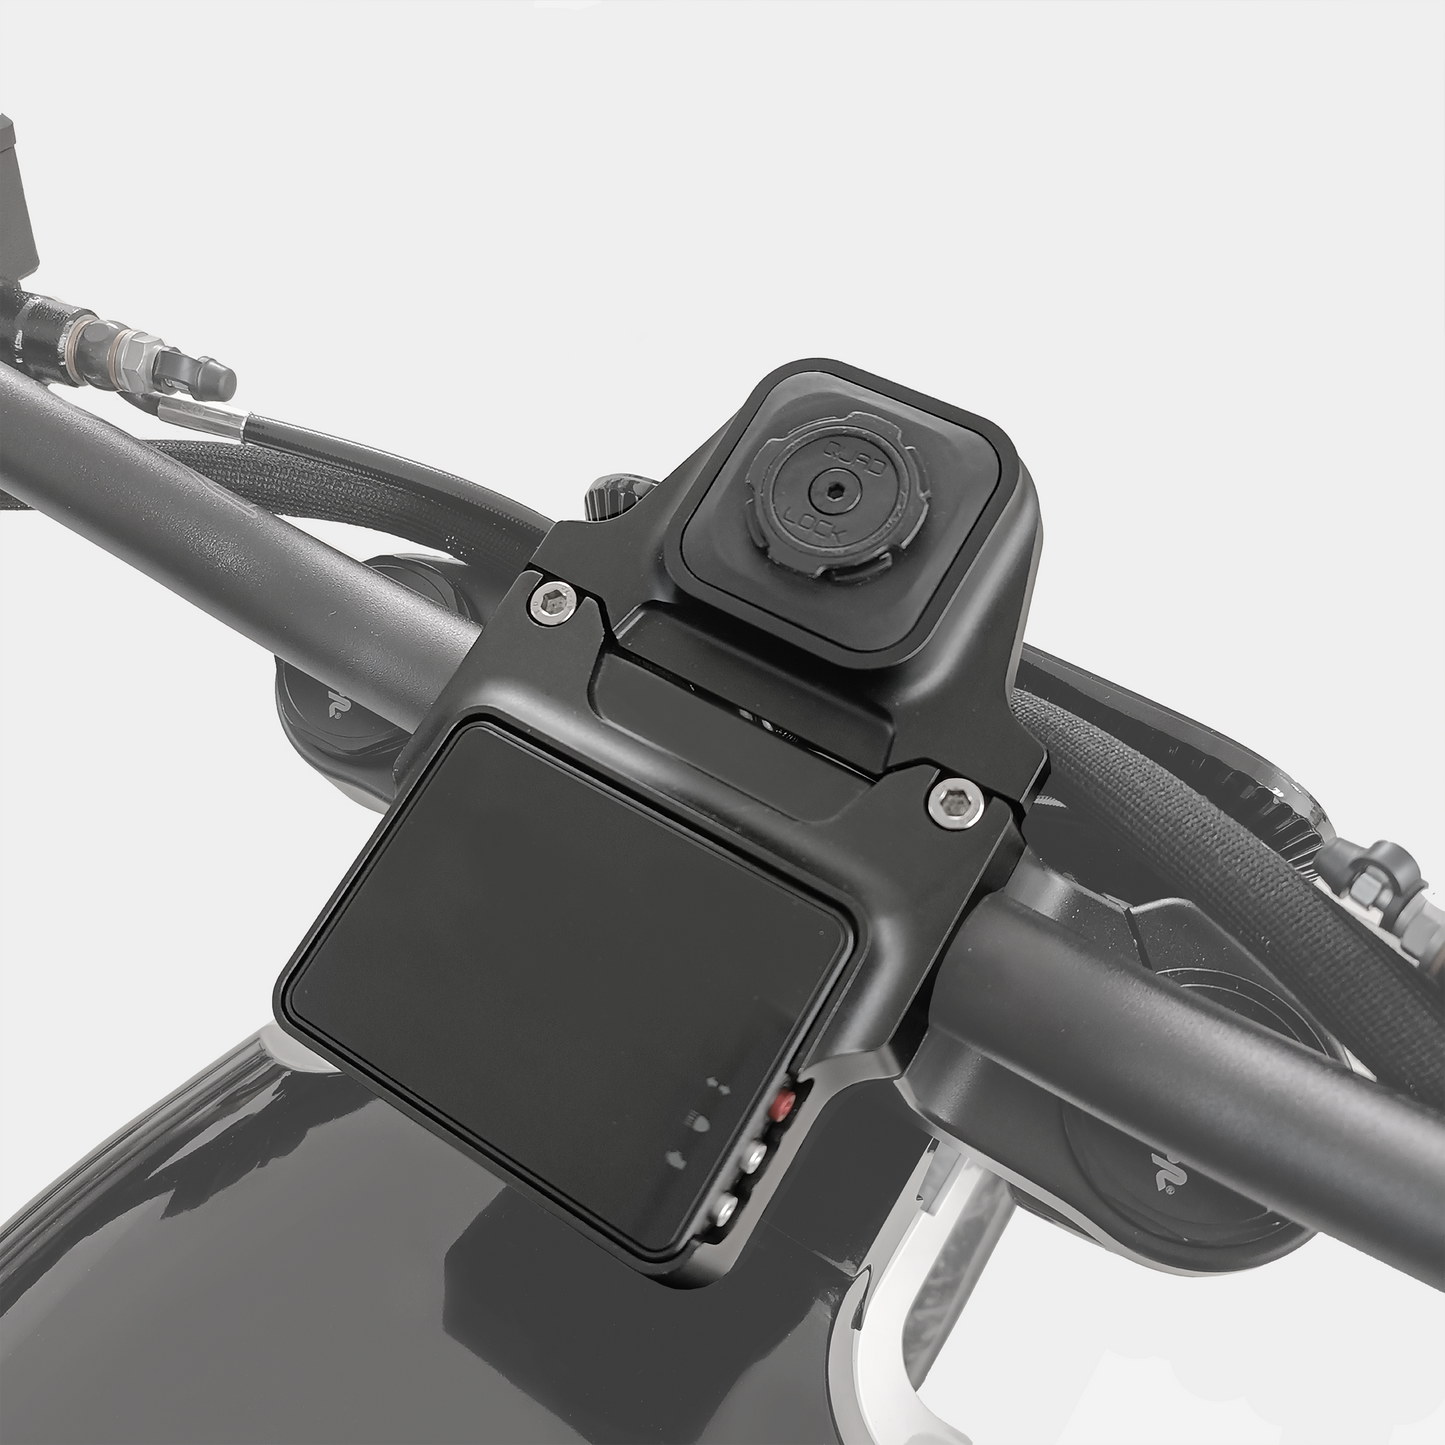 DAB x Quad Lock charger and phone mount